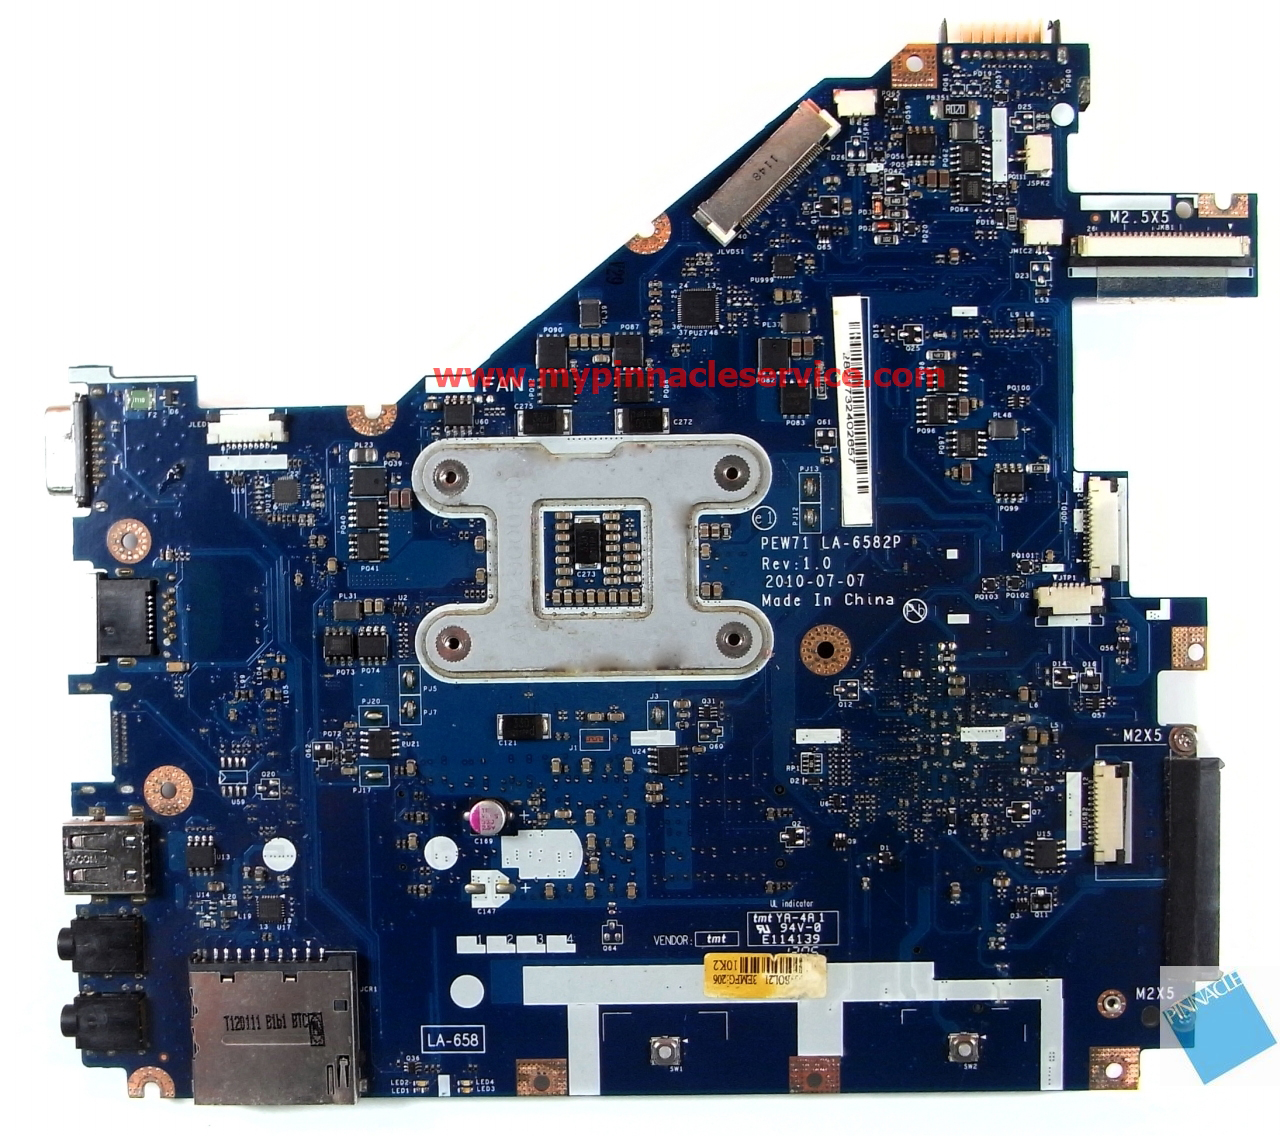 mbrjy02002-motherboard-for-acer-aspire-5333-5733-emachines-e529-e729-la-6582p-1-r0012548.jpg